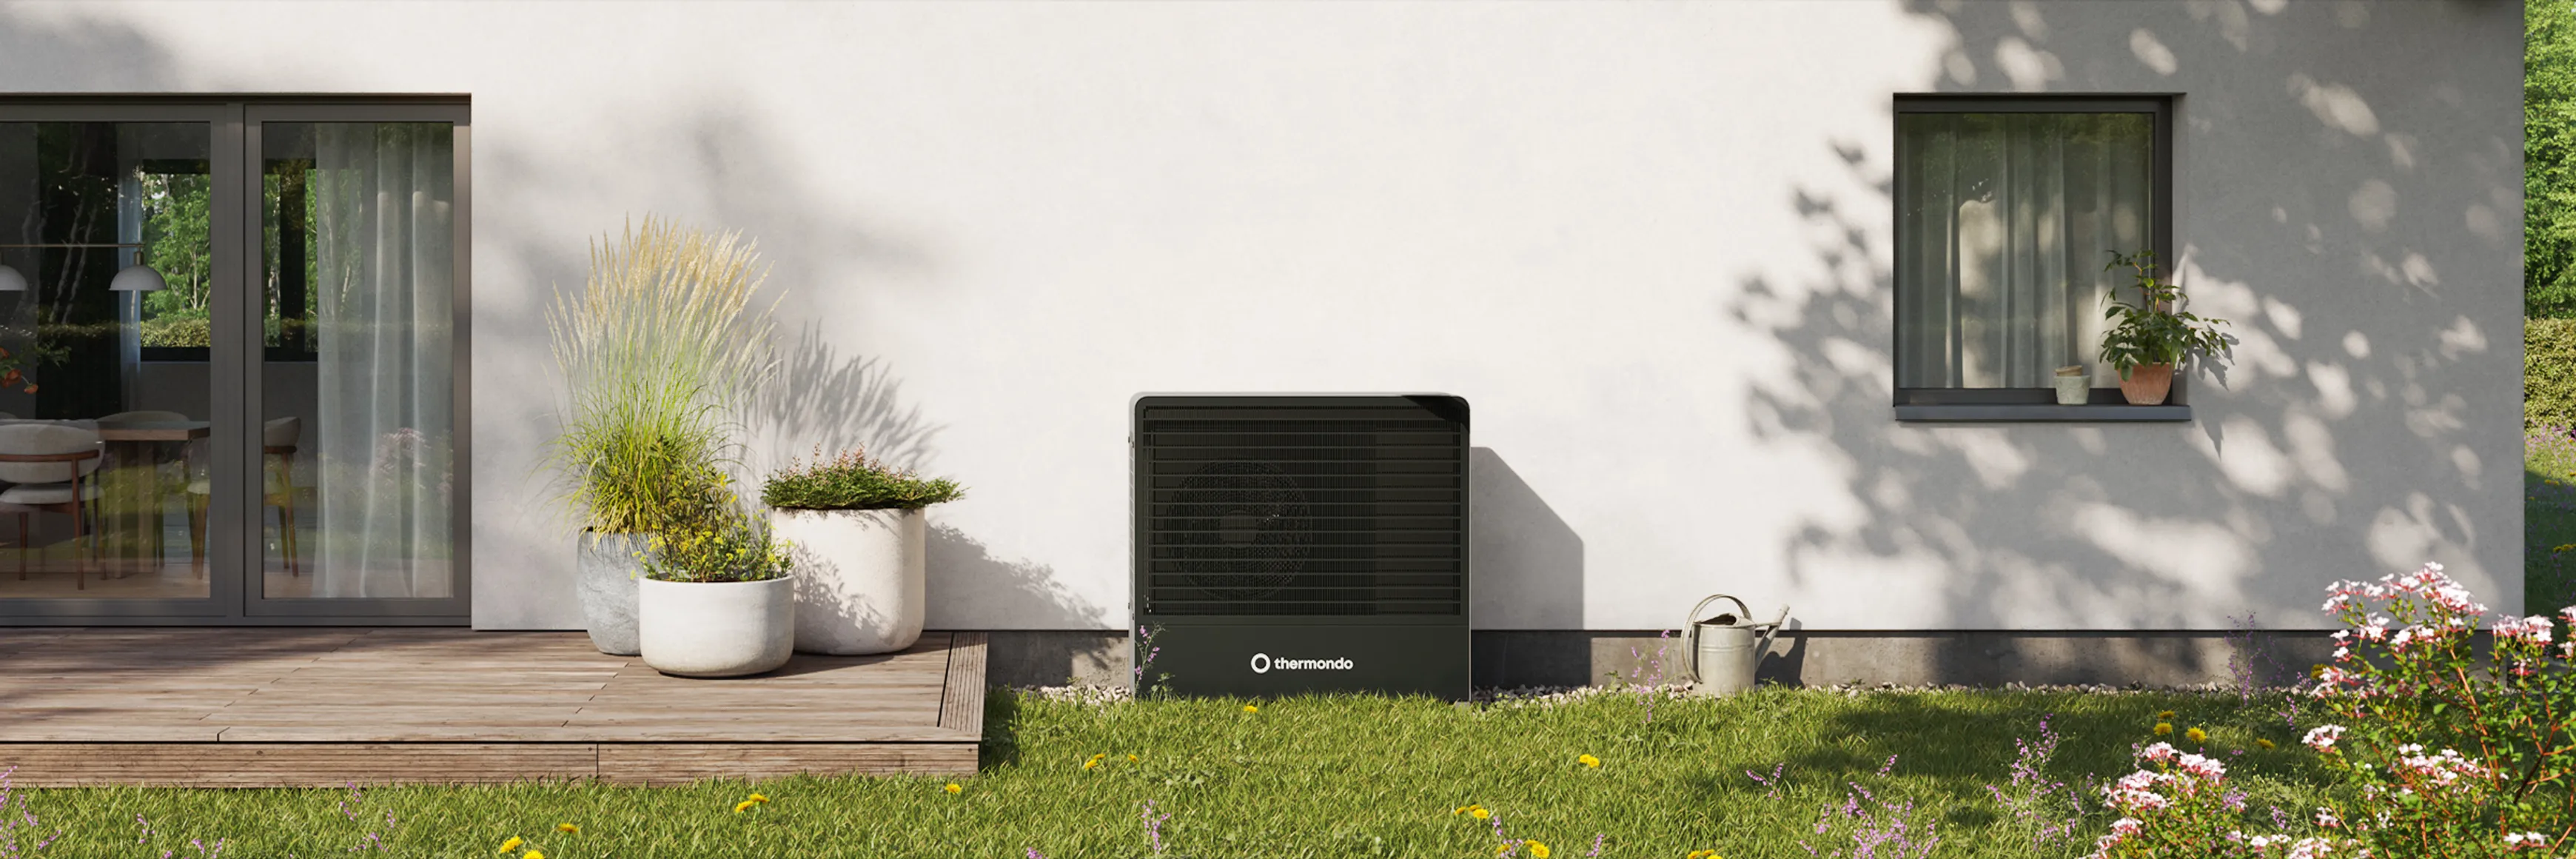 A thermondo heat pump cover in front of a house in a garden